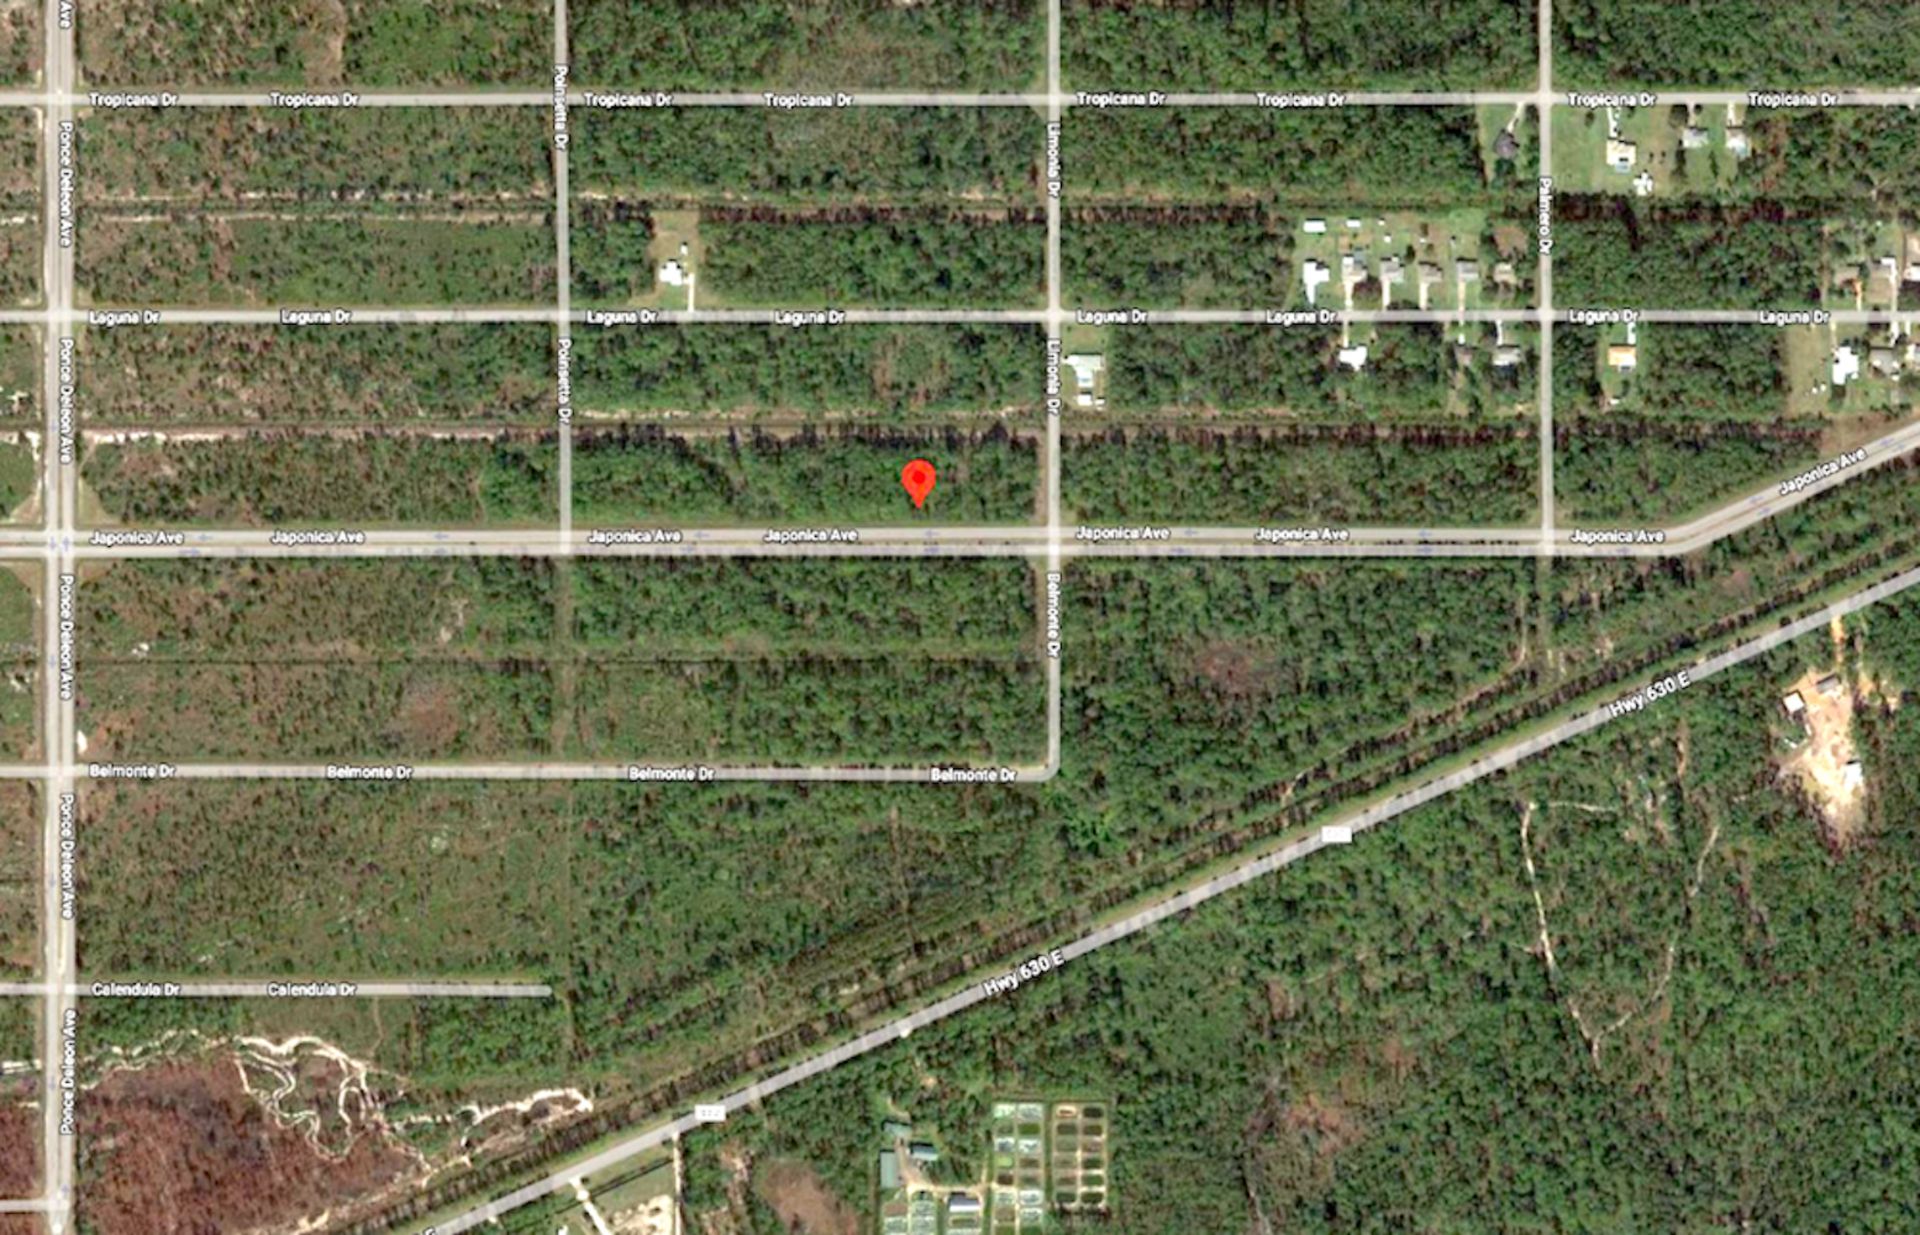 Build Your Escape to the Sunshine State on this Half-Acre Lot in Florida! - Image 6 of 11